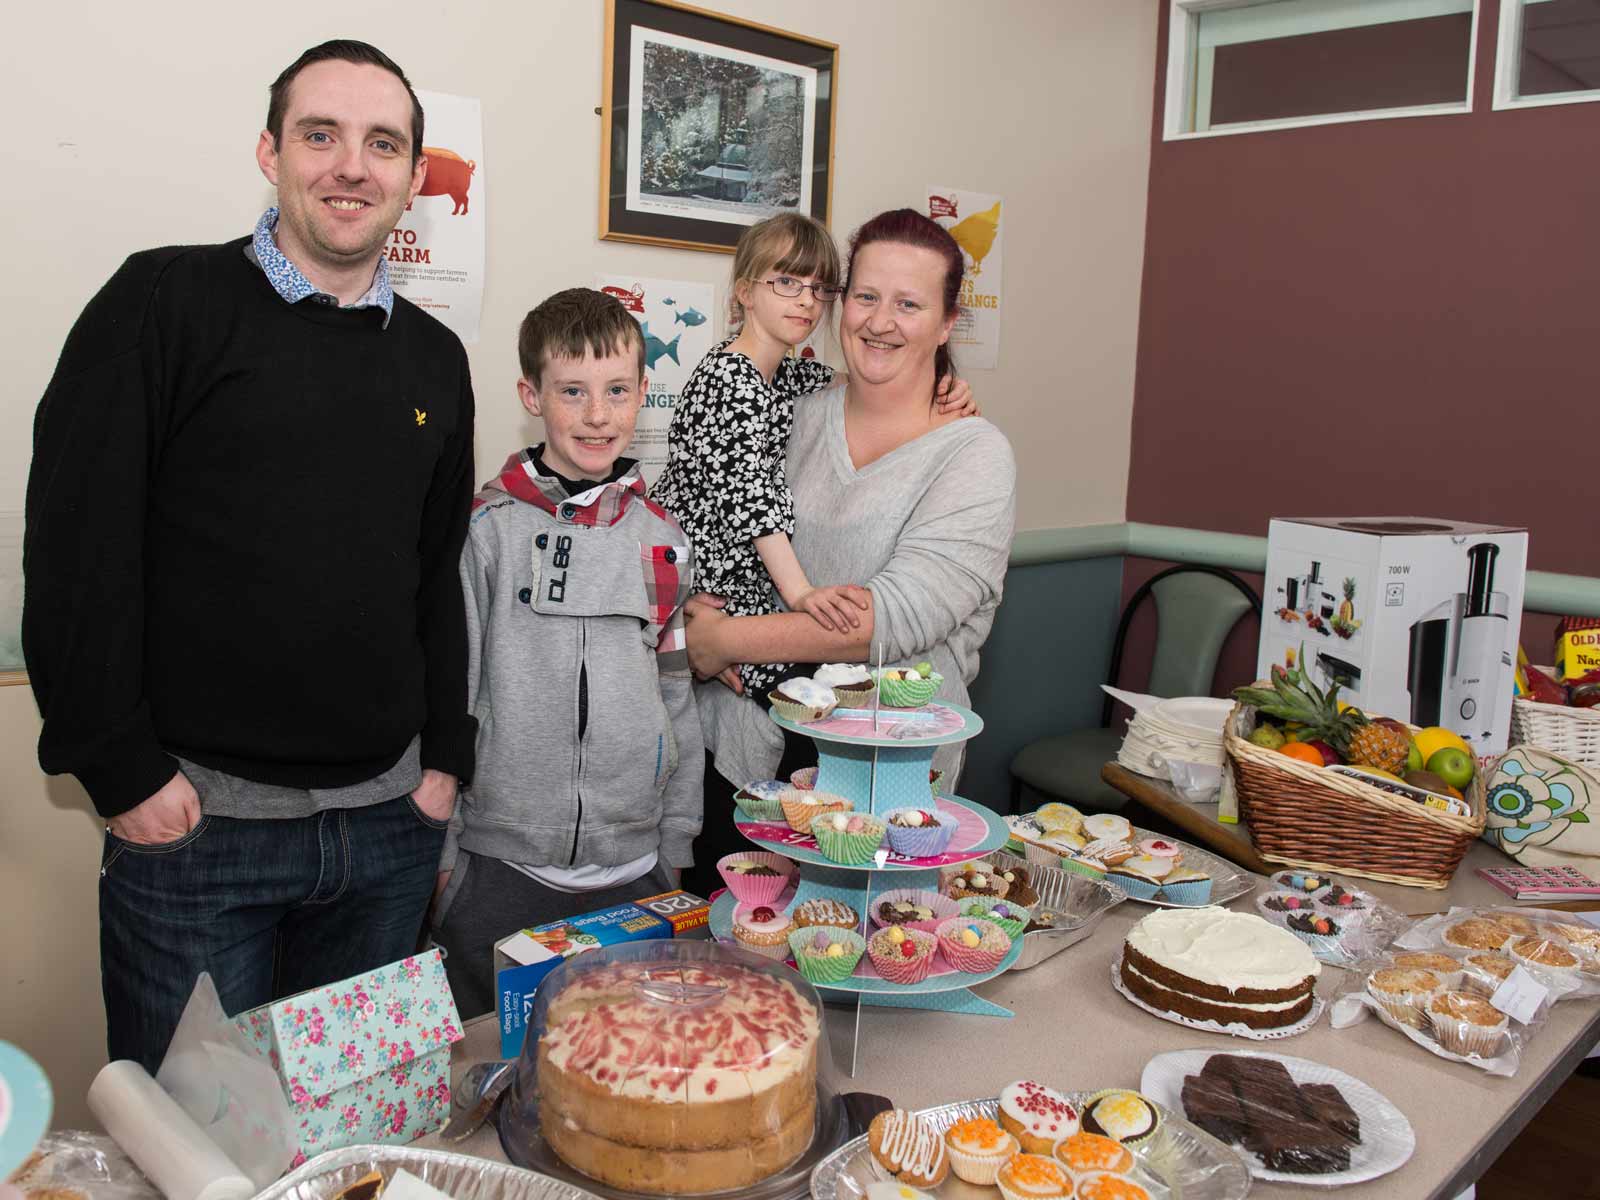 Oliva, (centre right) with her family at the cake and bake sale